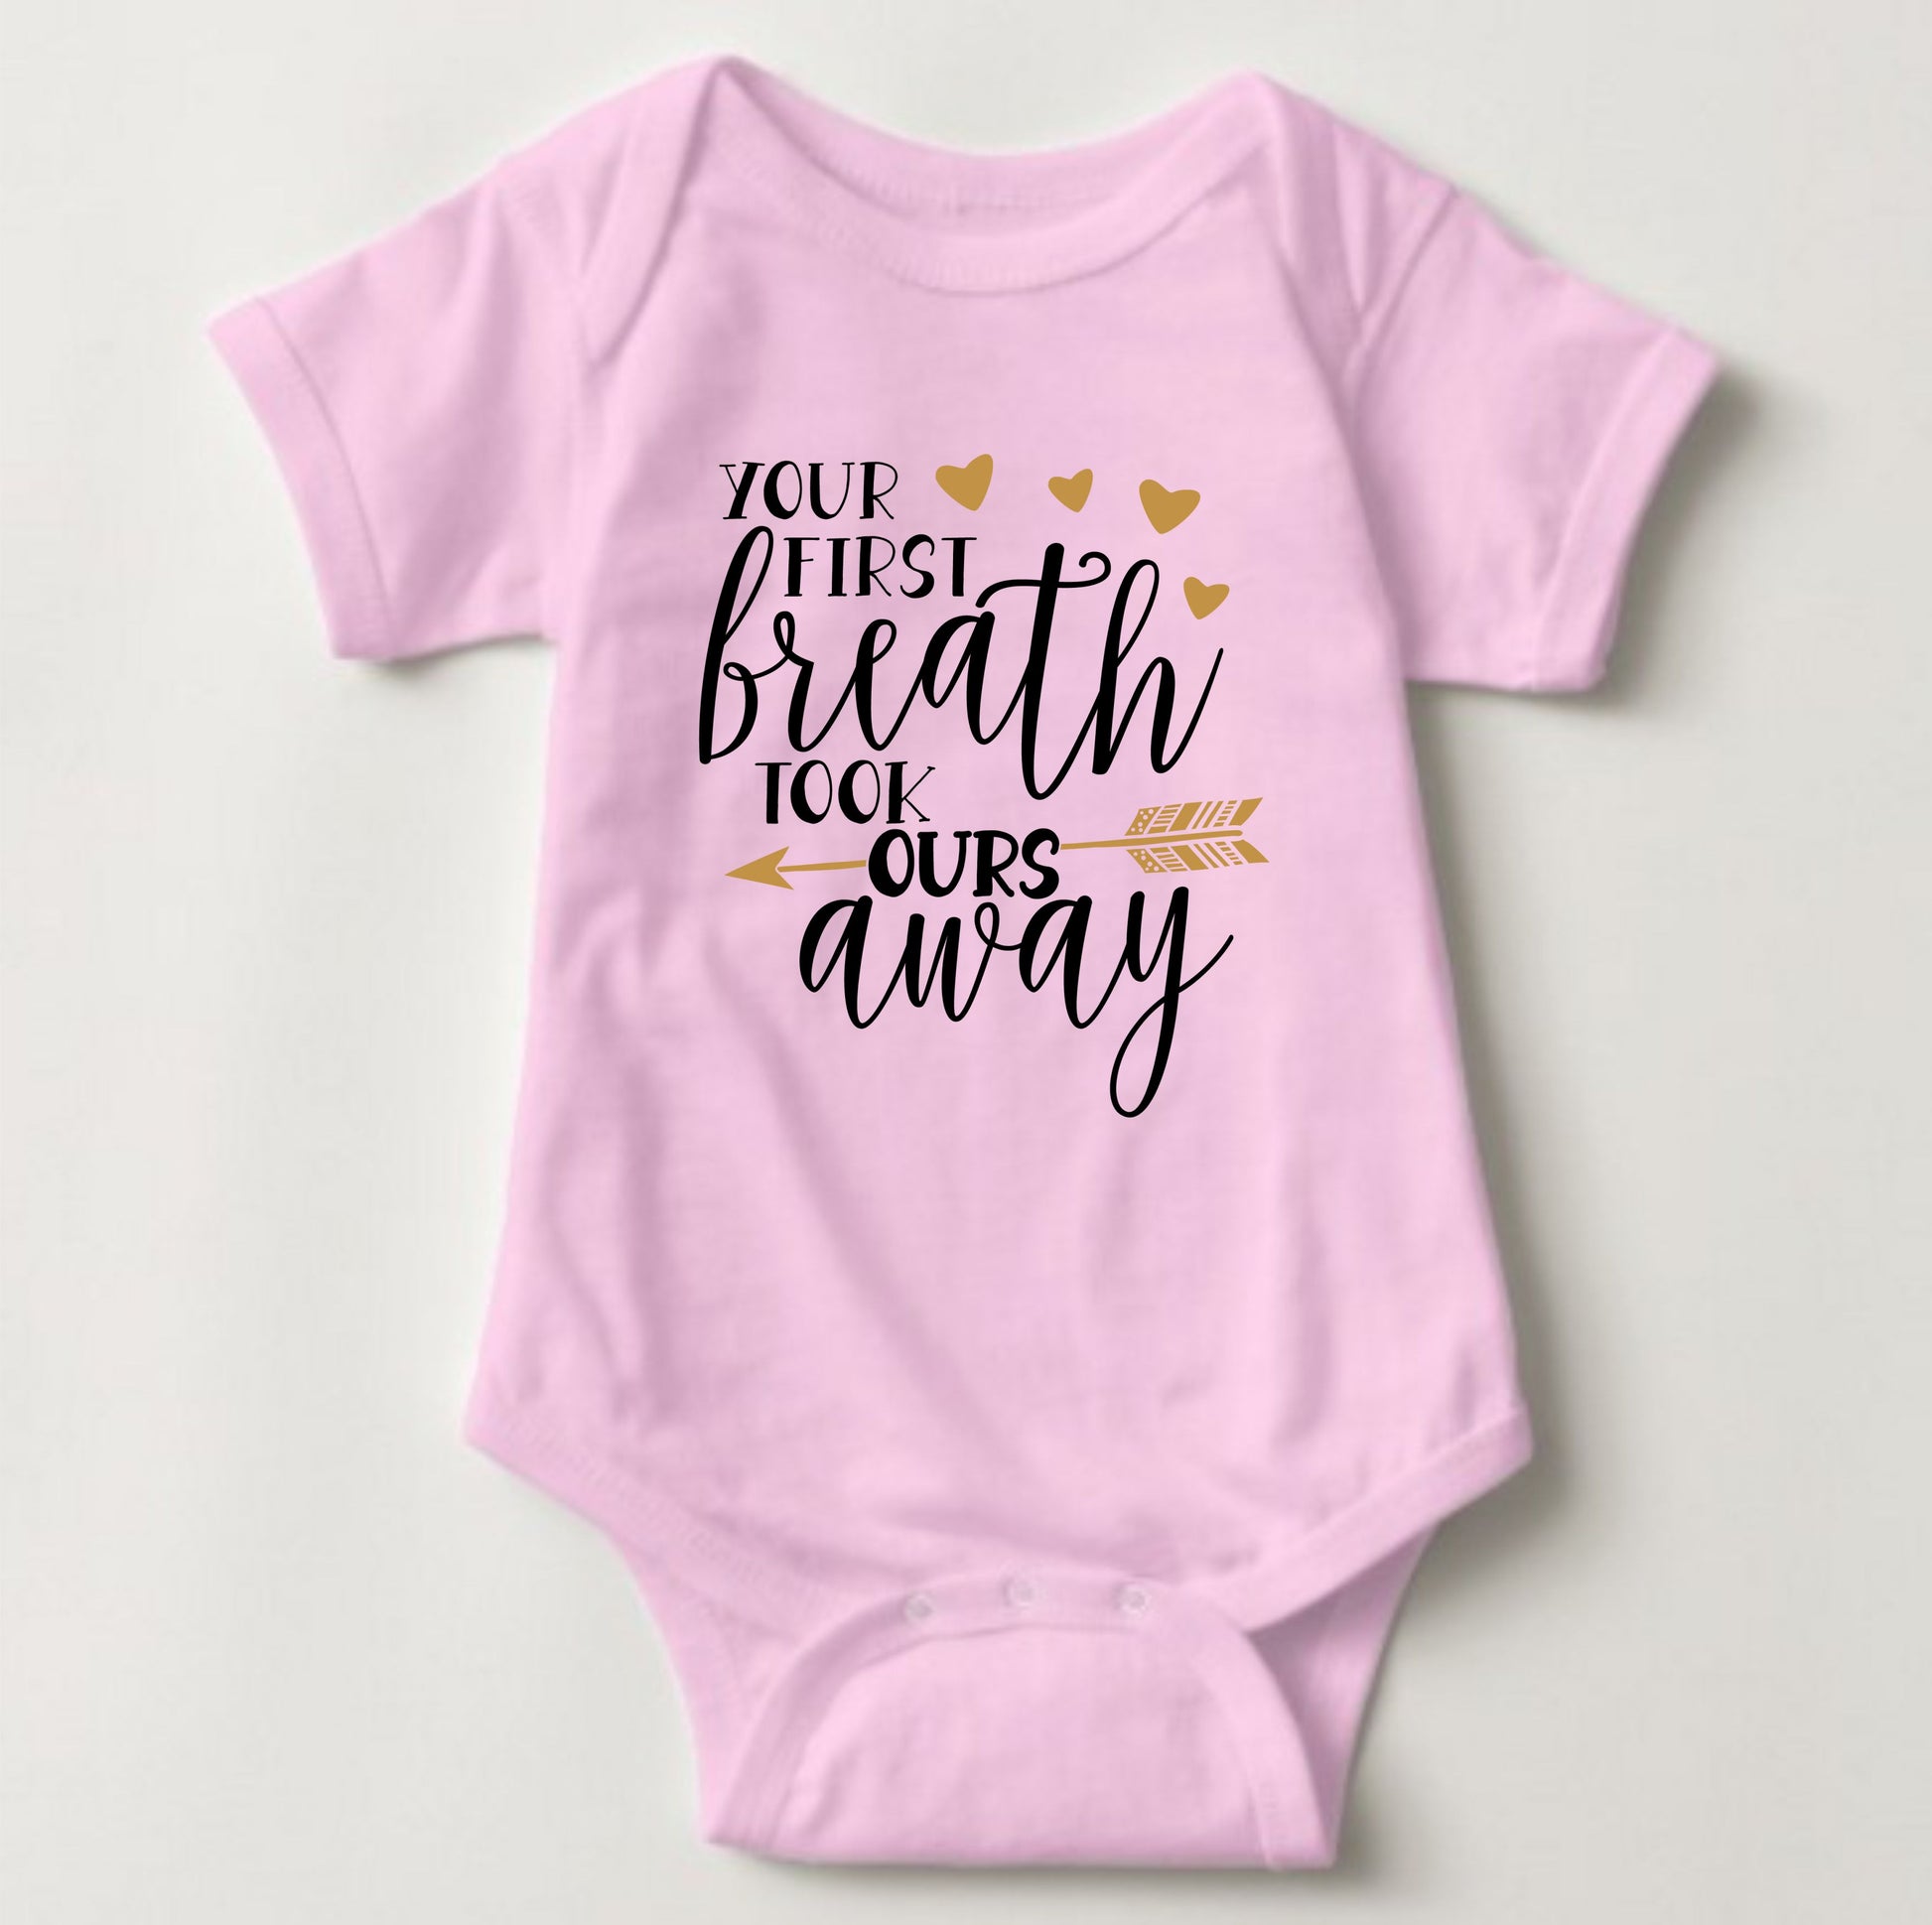 Baby Statement Onesies - Your First Breath Took ours Away - MYSTYLEMYCLOTHING